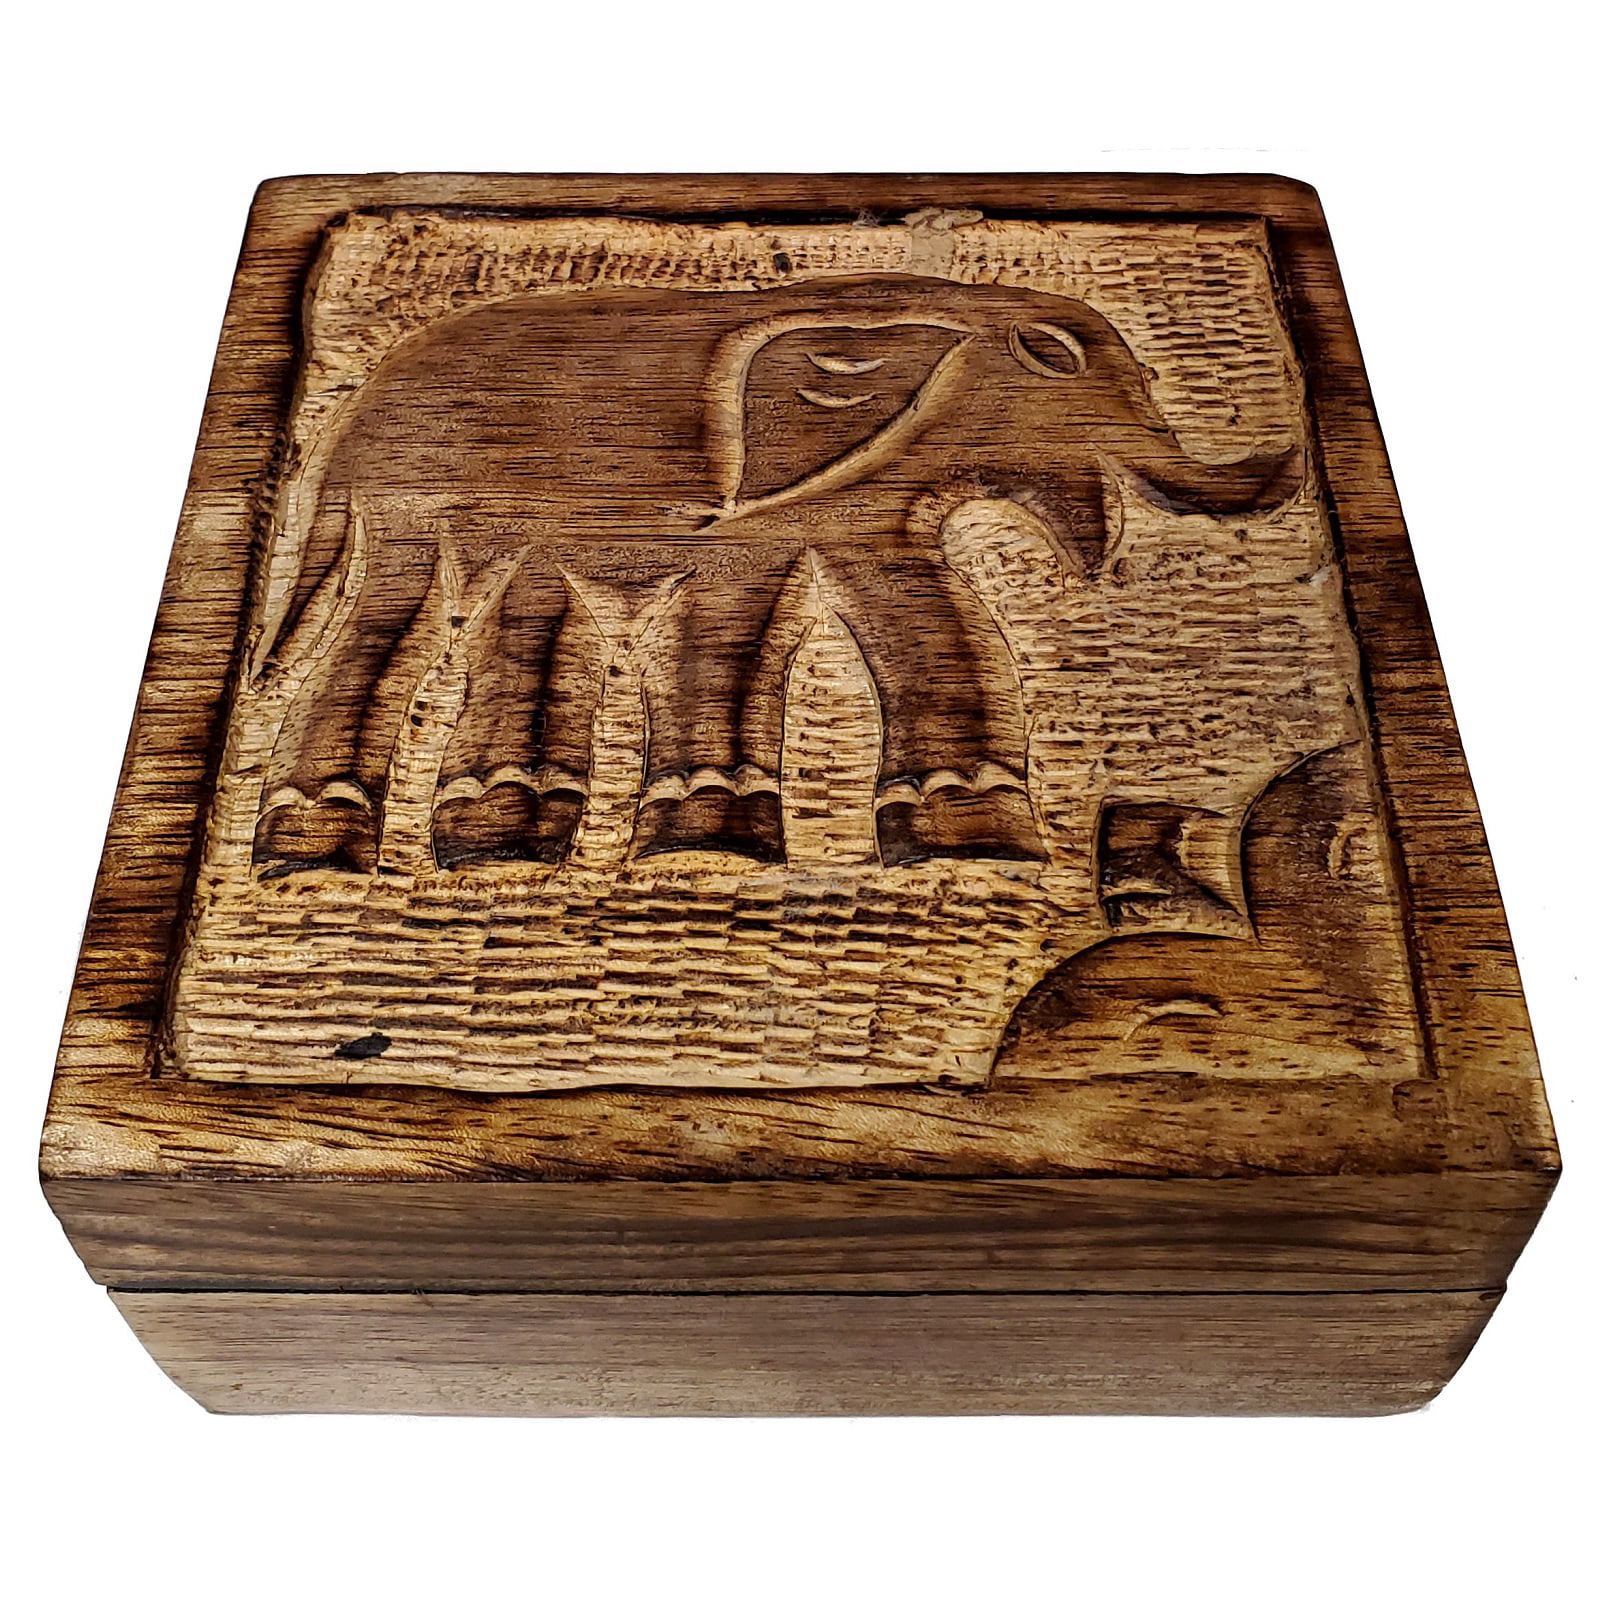 Carved Wooden Jewelry Trinket Box